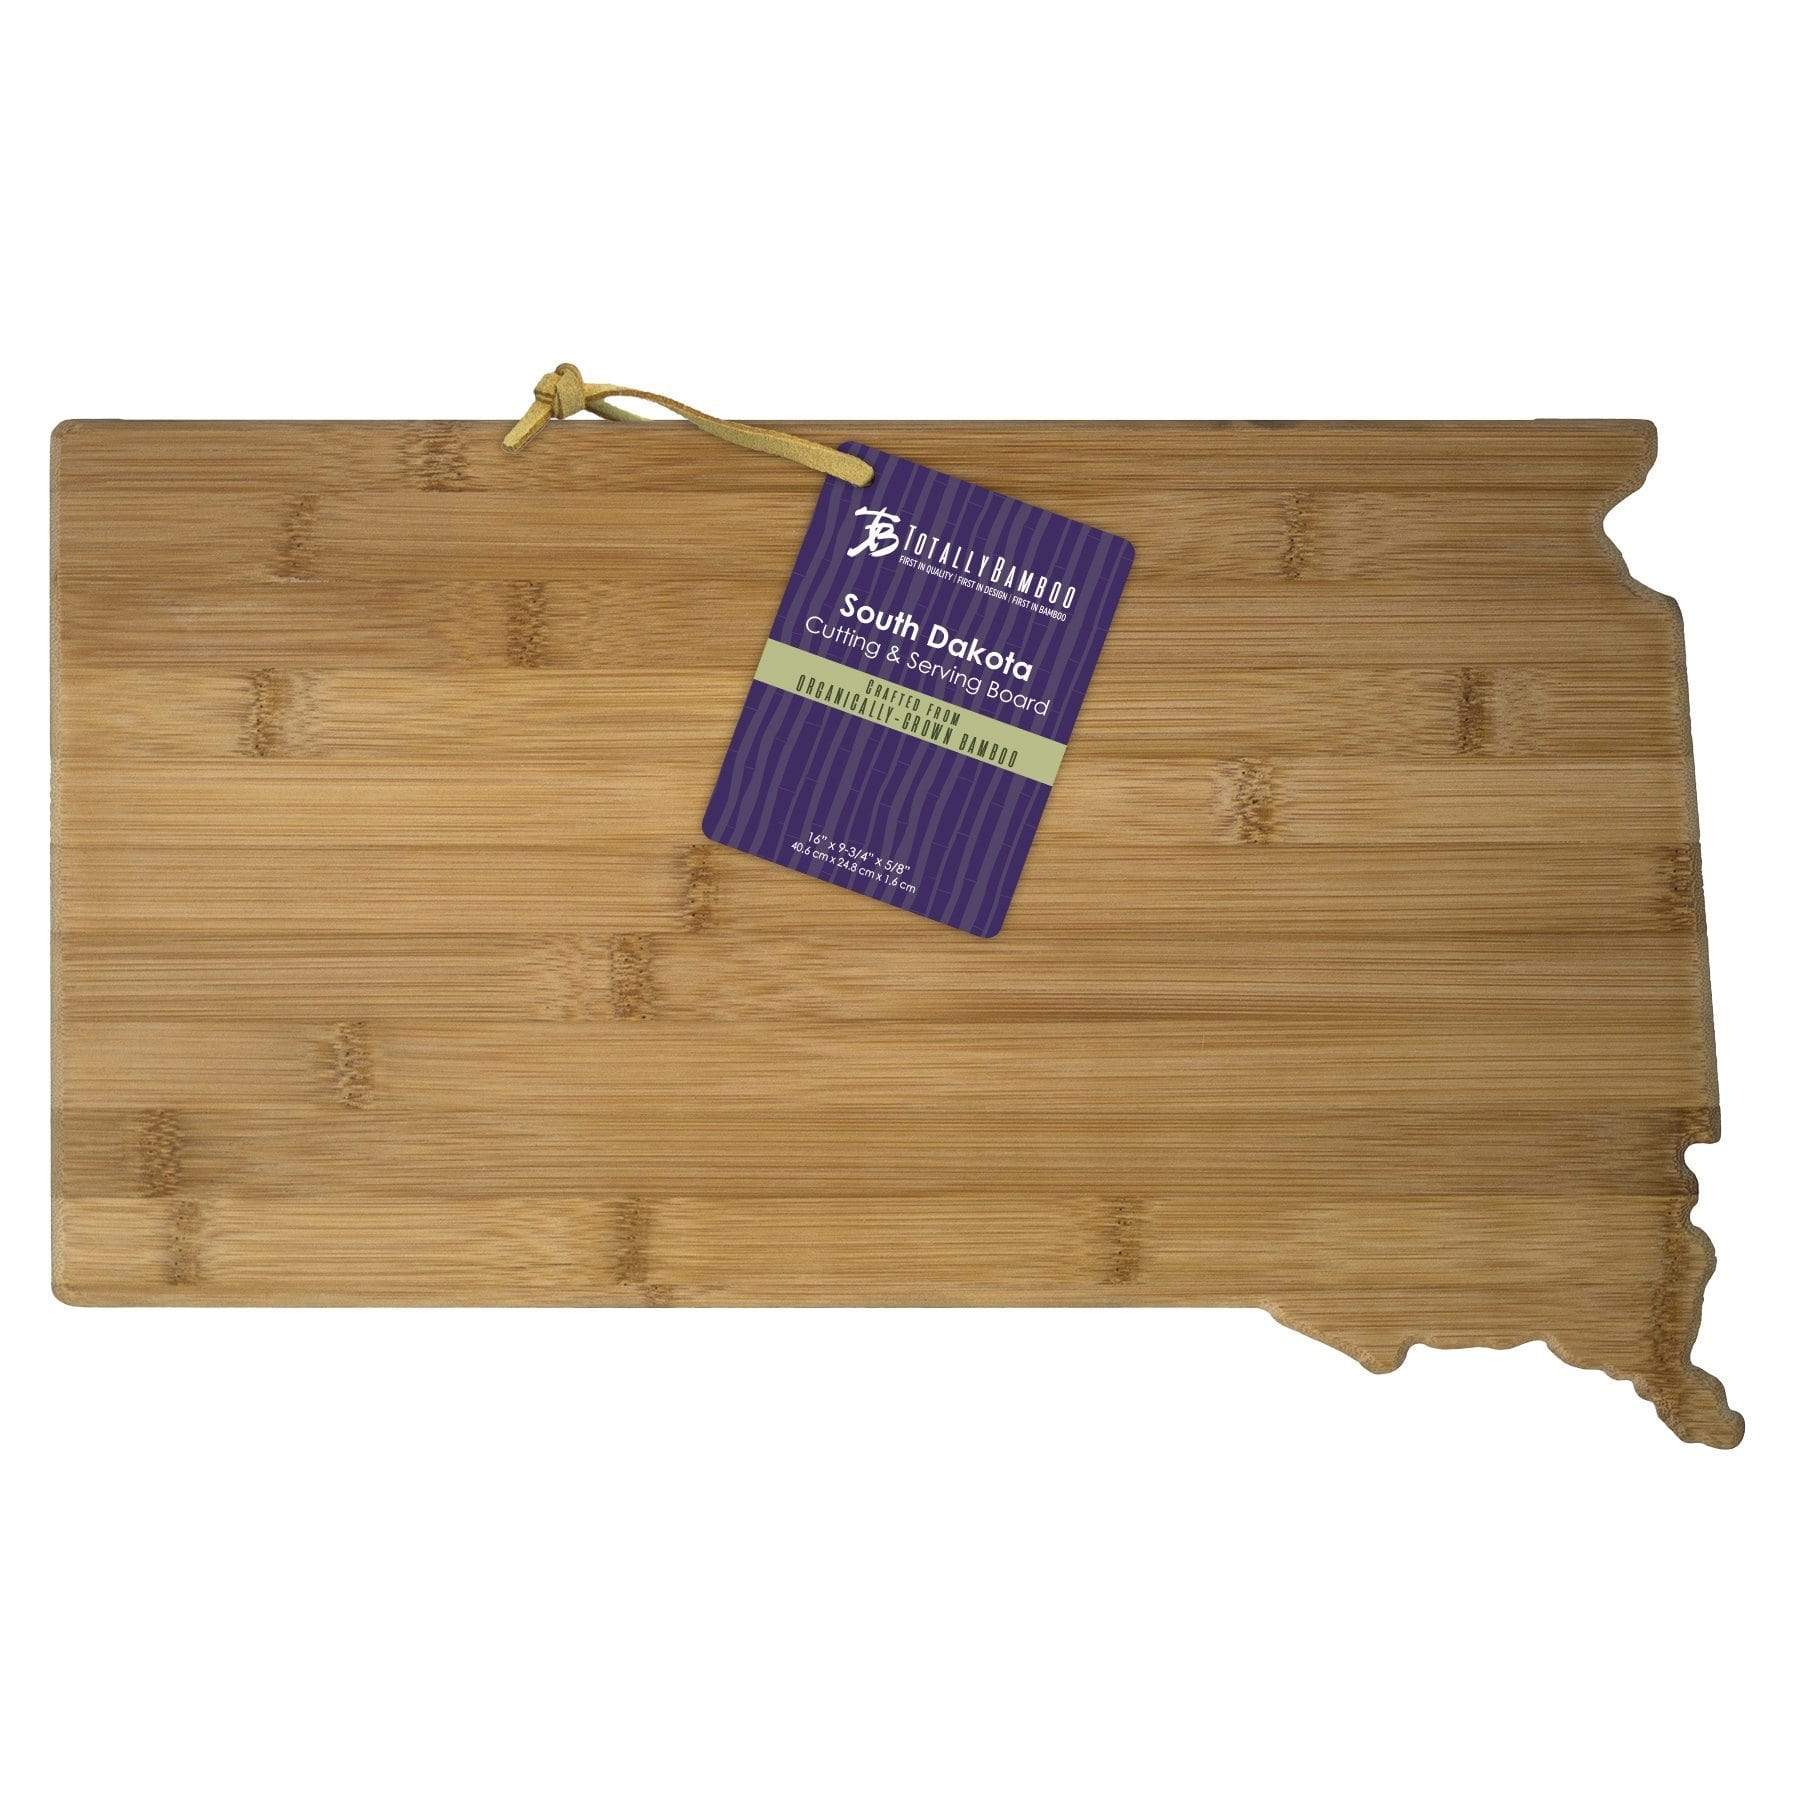 https://totallybamboo.com/cdn/shop/products/south-dakota-state-shaped-bamboo-serving-and-cutting-board-totally-bamboo-574601.jpg?v=1627990101